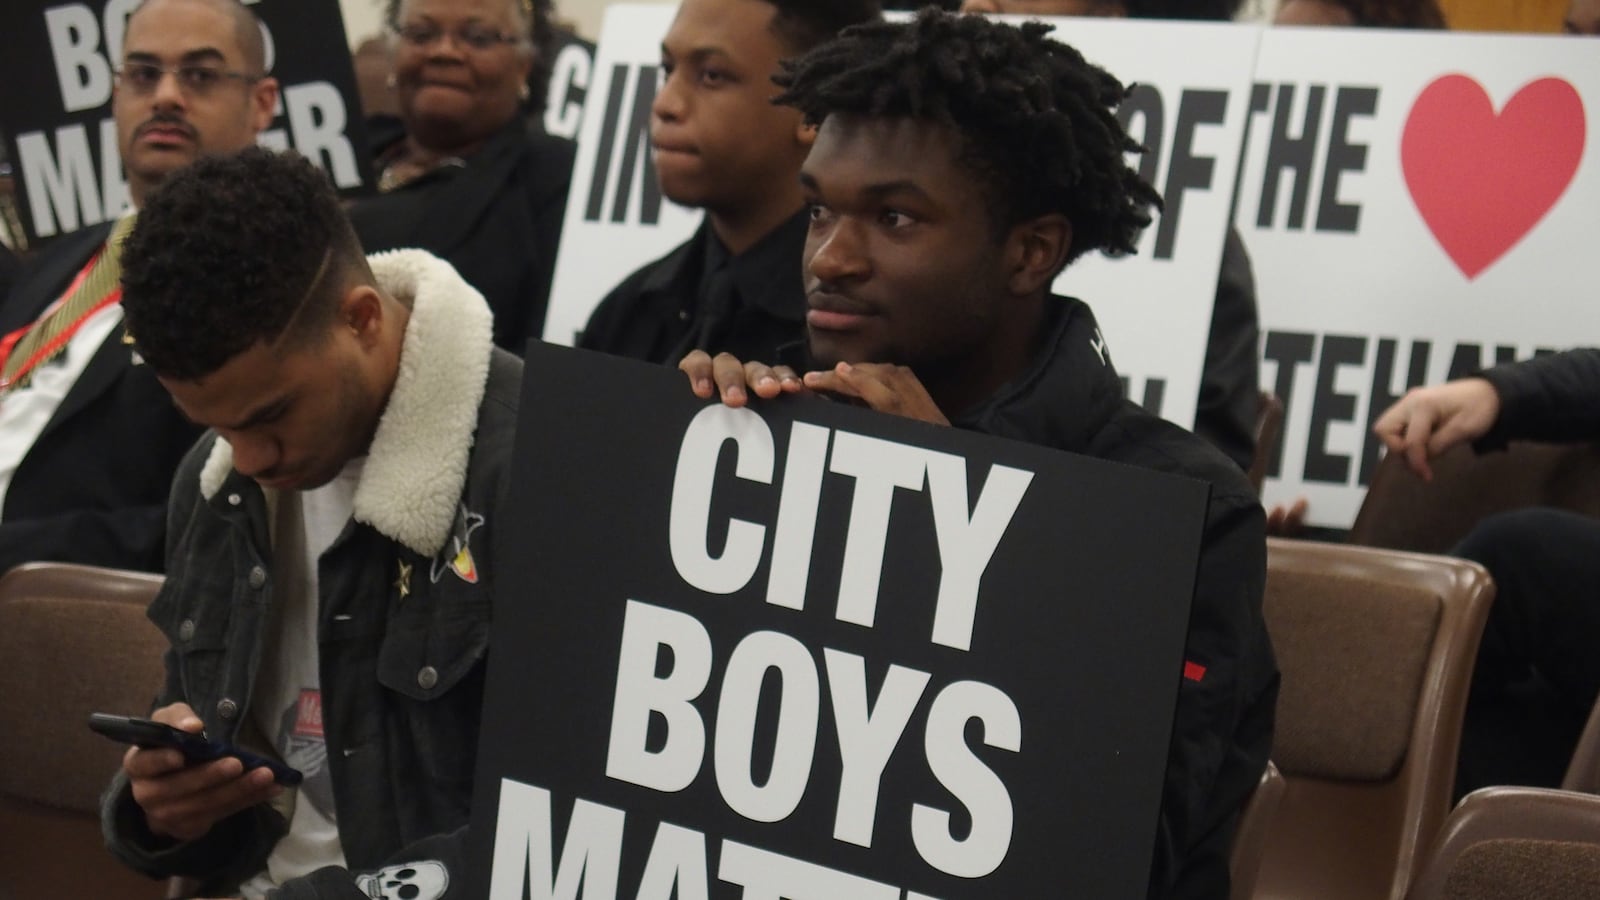 About 40 parents, students, and supporters of City University Boys Preparatory asked the Shelby County Schools board to keep the school open.